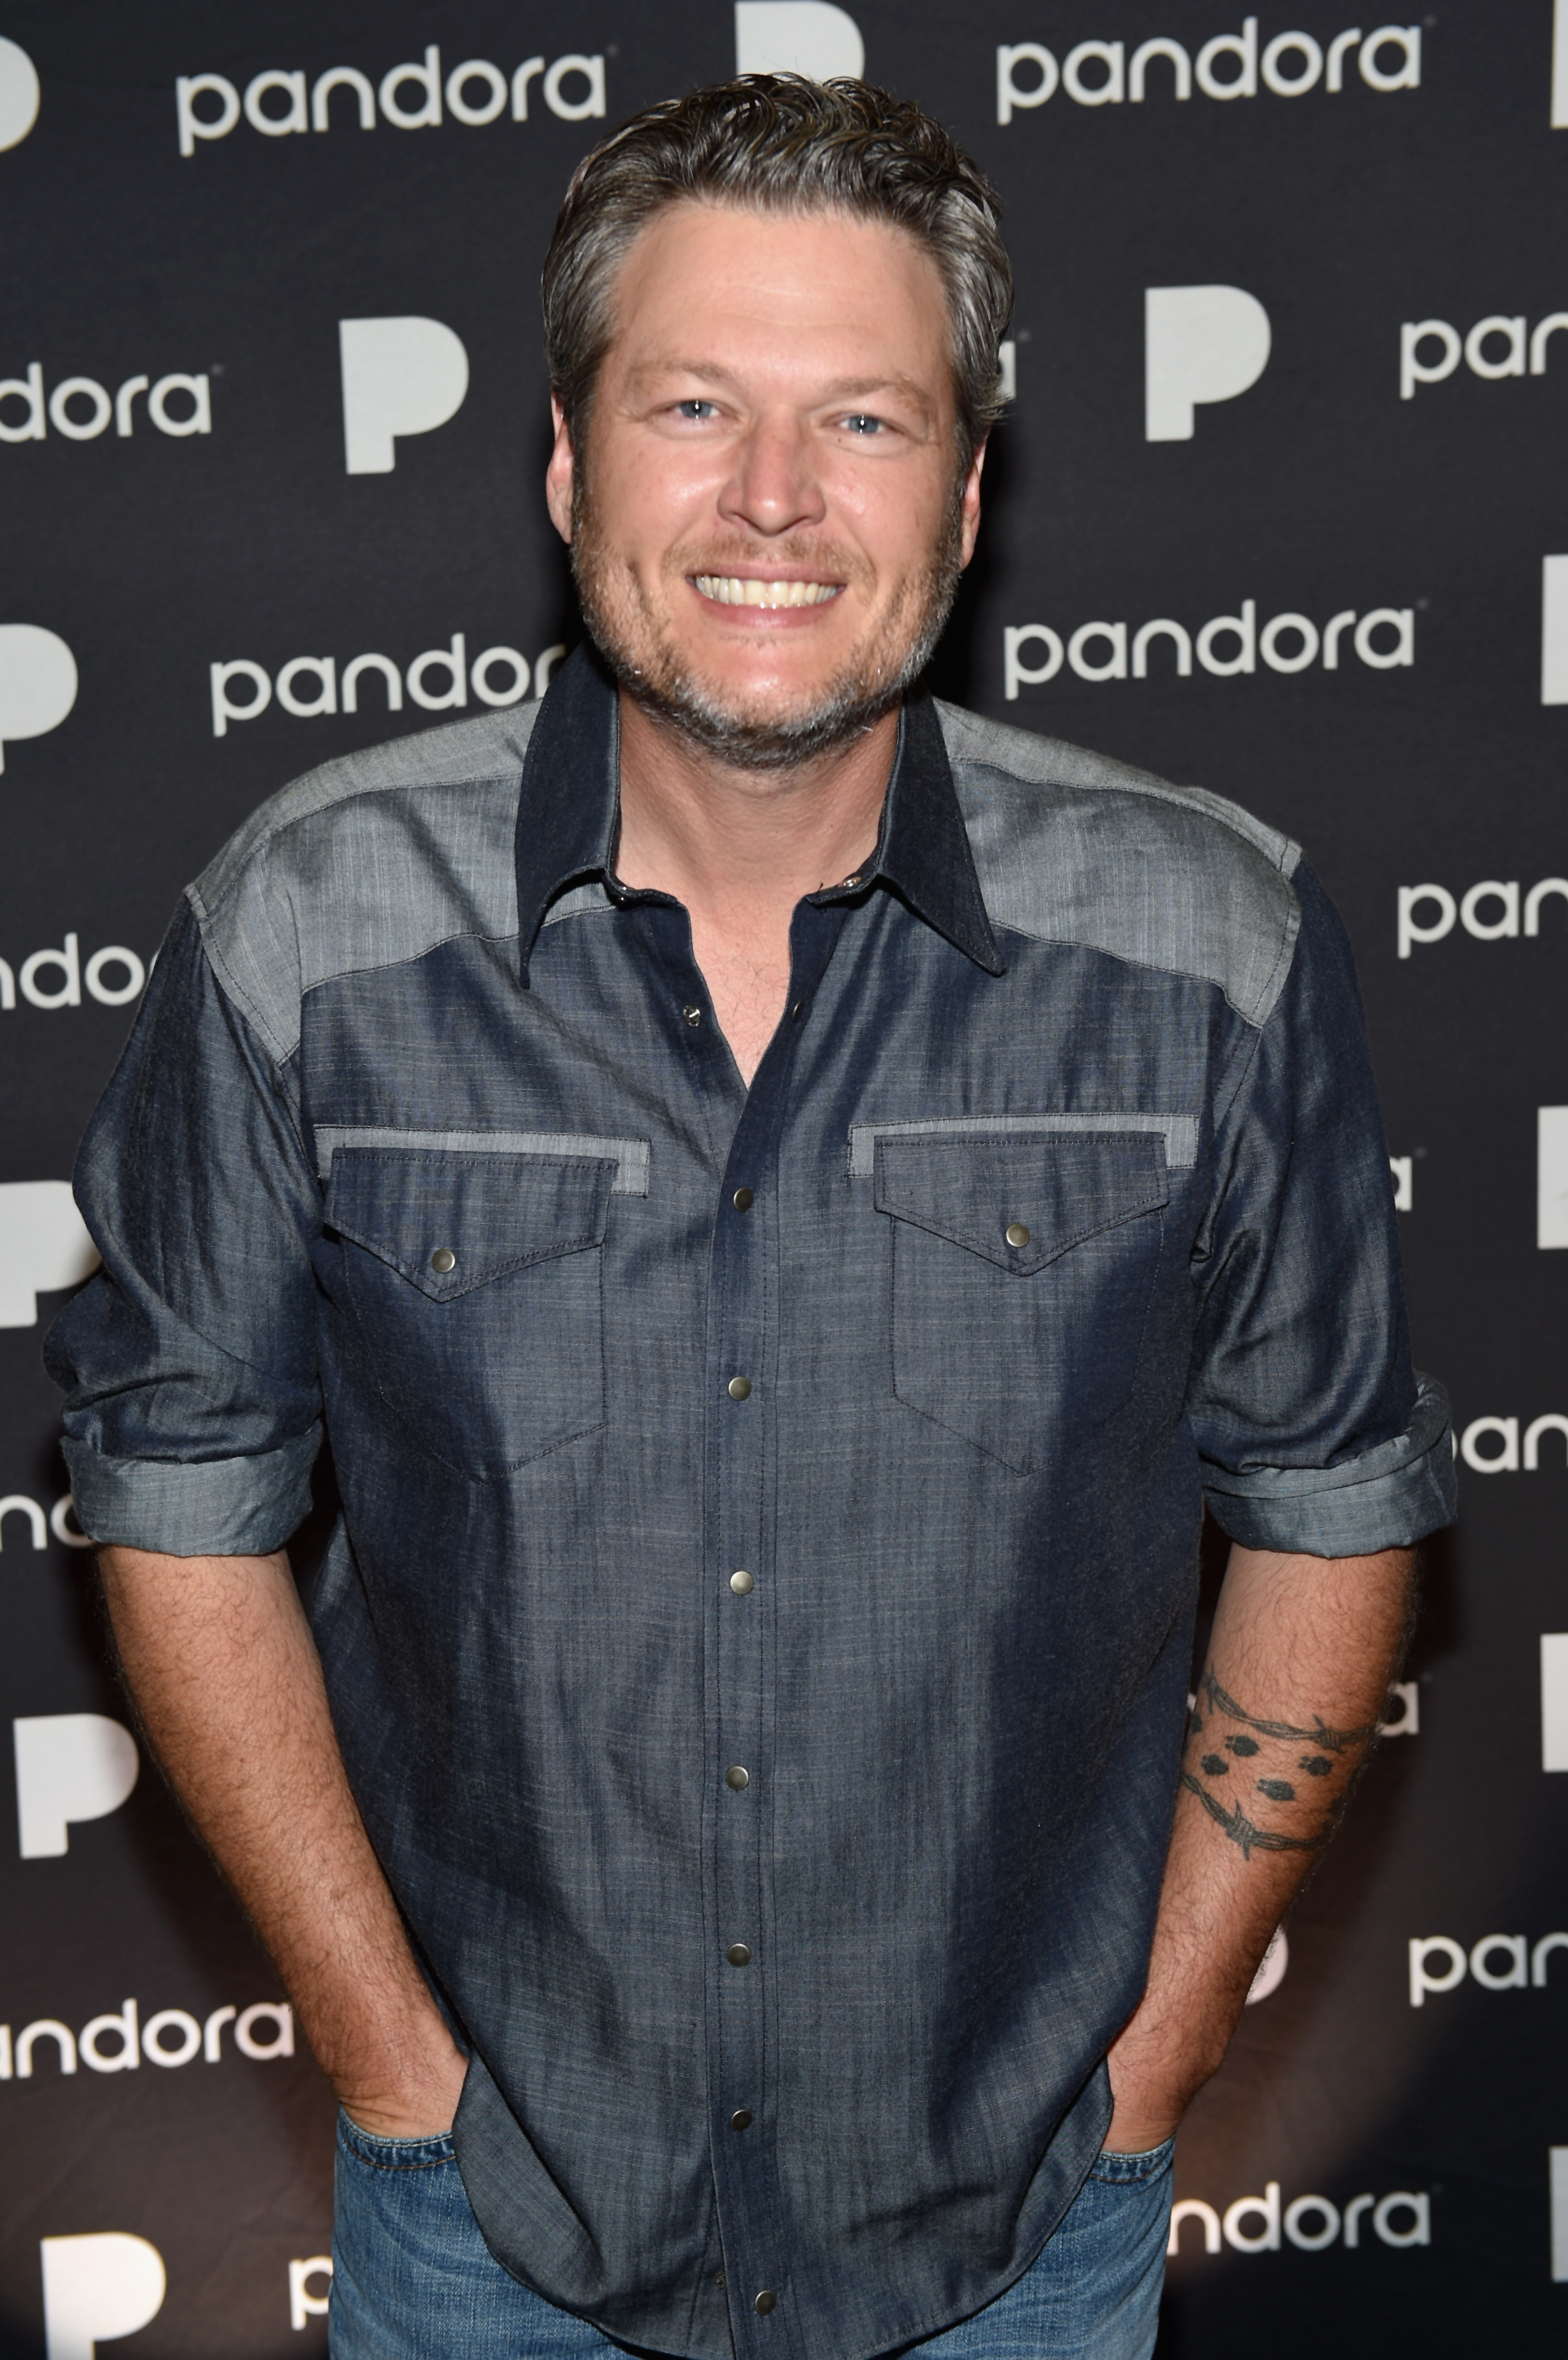 Blake Shelton bei Pandora Sounds Like You: Country am 3. November 2017 in Nashville, Tennessee | Quelle: Getty Images